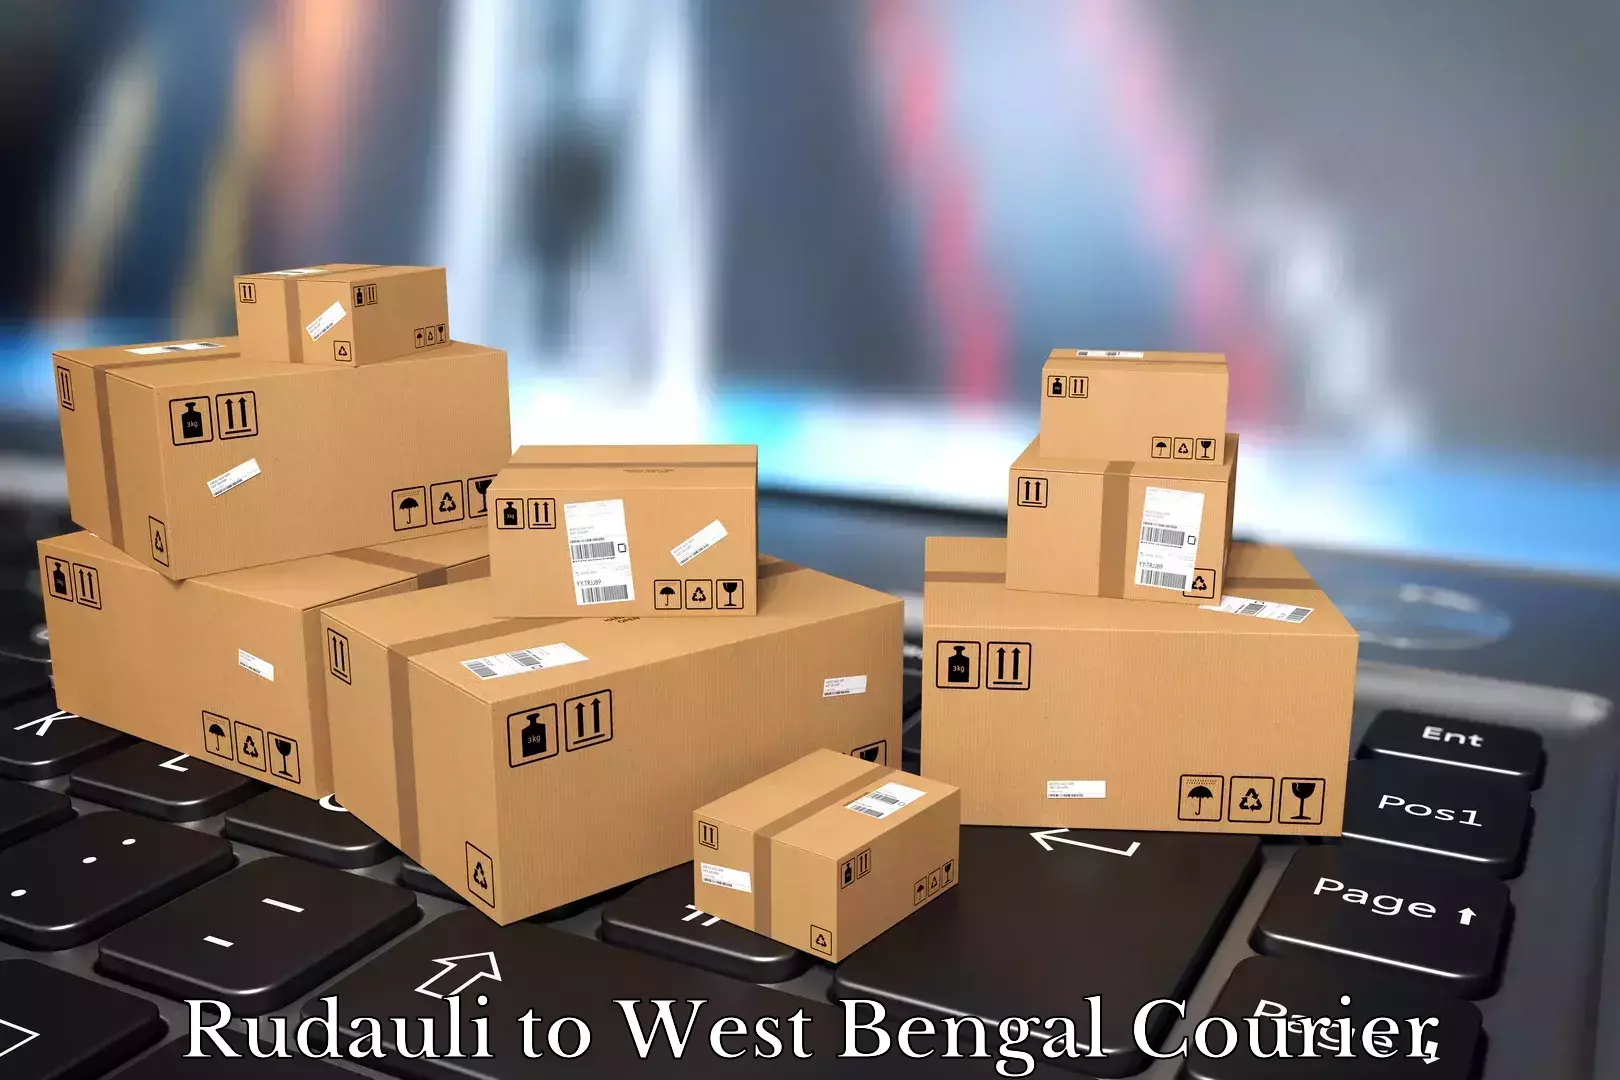 Trusted relocation experts Rudauli to West Bengal